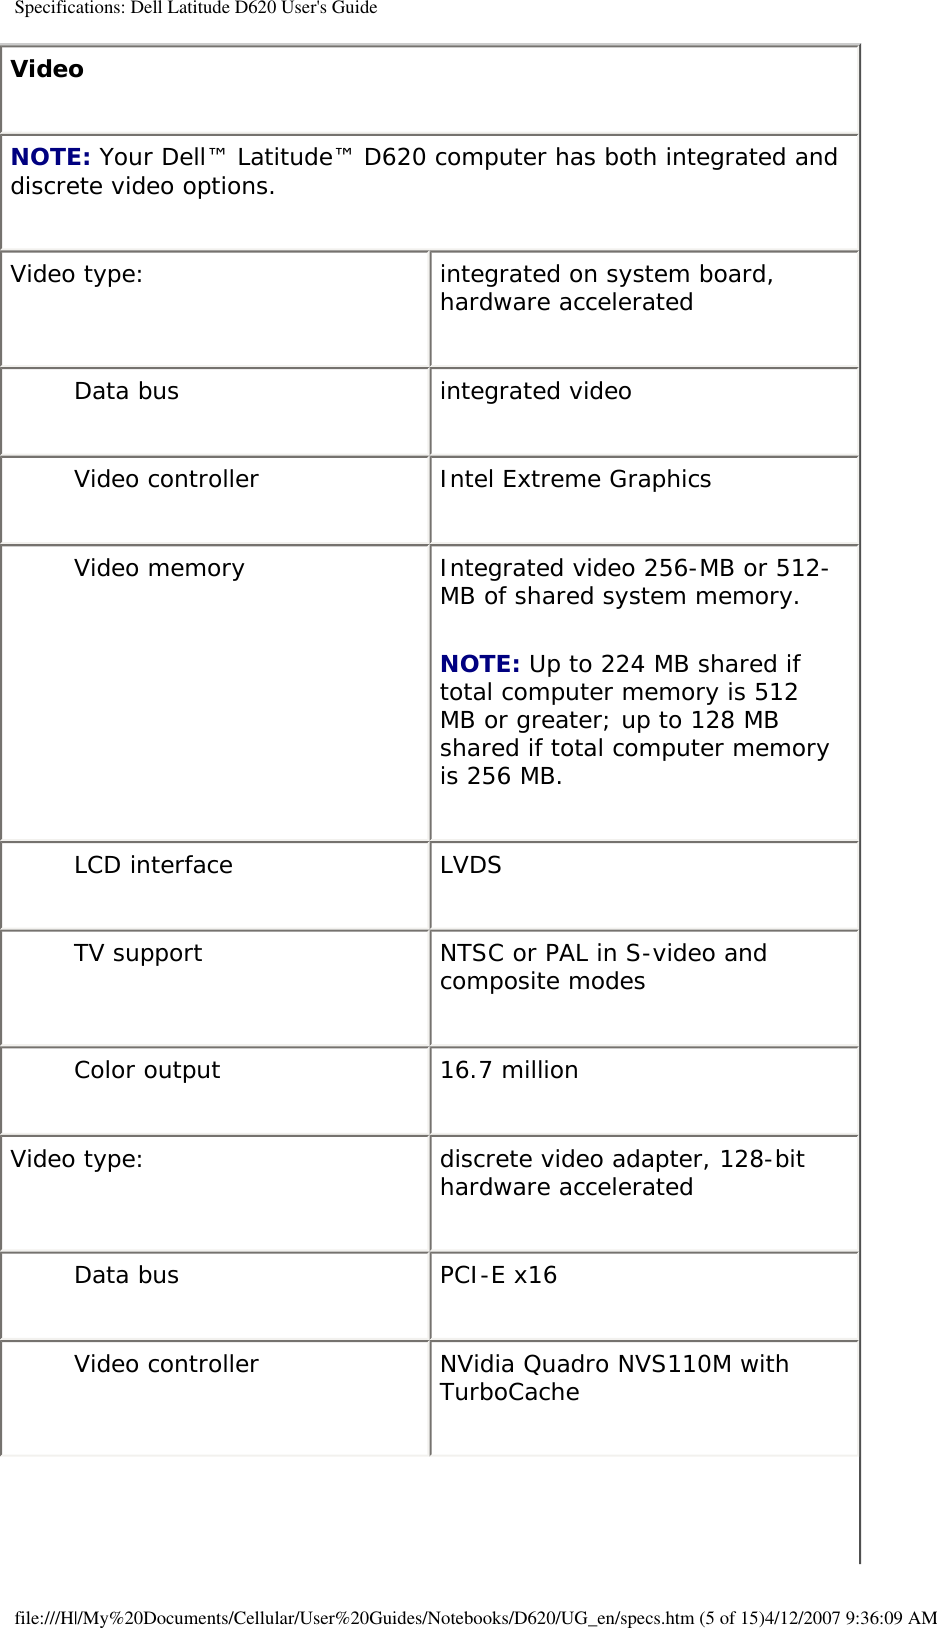 Specifications: Dell Latitude D620 User&apos;s GuideVideo NOTE: Your Dell™ Latitude™ D620 computer has both integrated and discrete video options.Video type: integrated on system board, hardware acceleratedData bus integrated videoVideo controller Intel Extreme GraphicsVideo memory Integrated video 256-MB or 512-MB of shared system memory.NOTE: Up to 224 MB shared if total computer memory is 512 MB or greater; up to 128 MB shared if total computer memory is 256 MB.LCD interface LVDSTV support NTSC or PAL in S-video and composite modesColor output 16.7 millionVideo type: discrete video adapter, 128-bit hardware acceleratedData bus PCI-E x16 Video controller NVidia Quadro NVS110M with TurboCachefile:///H|/My%20Documents/Cellular/User%20Guides/Notebooks/D620/UG_en/specs.htm (5 of 15)4/12/2007 9:36:09 AM